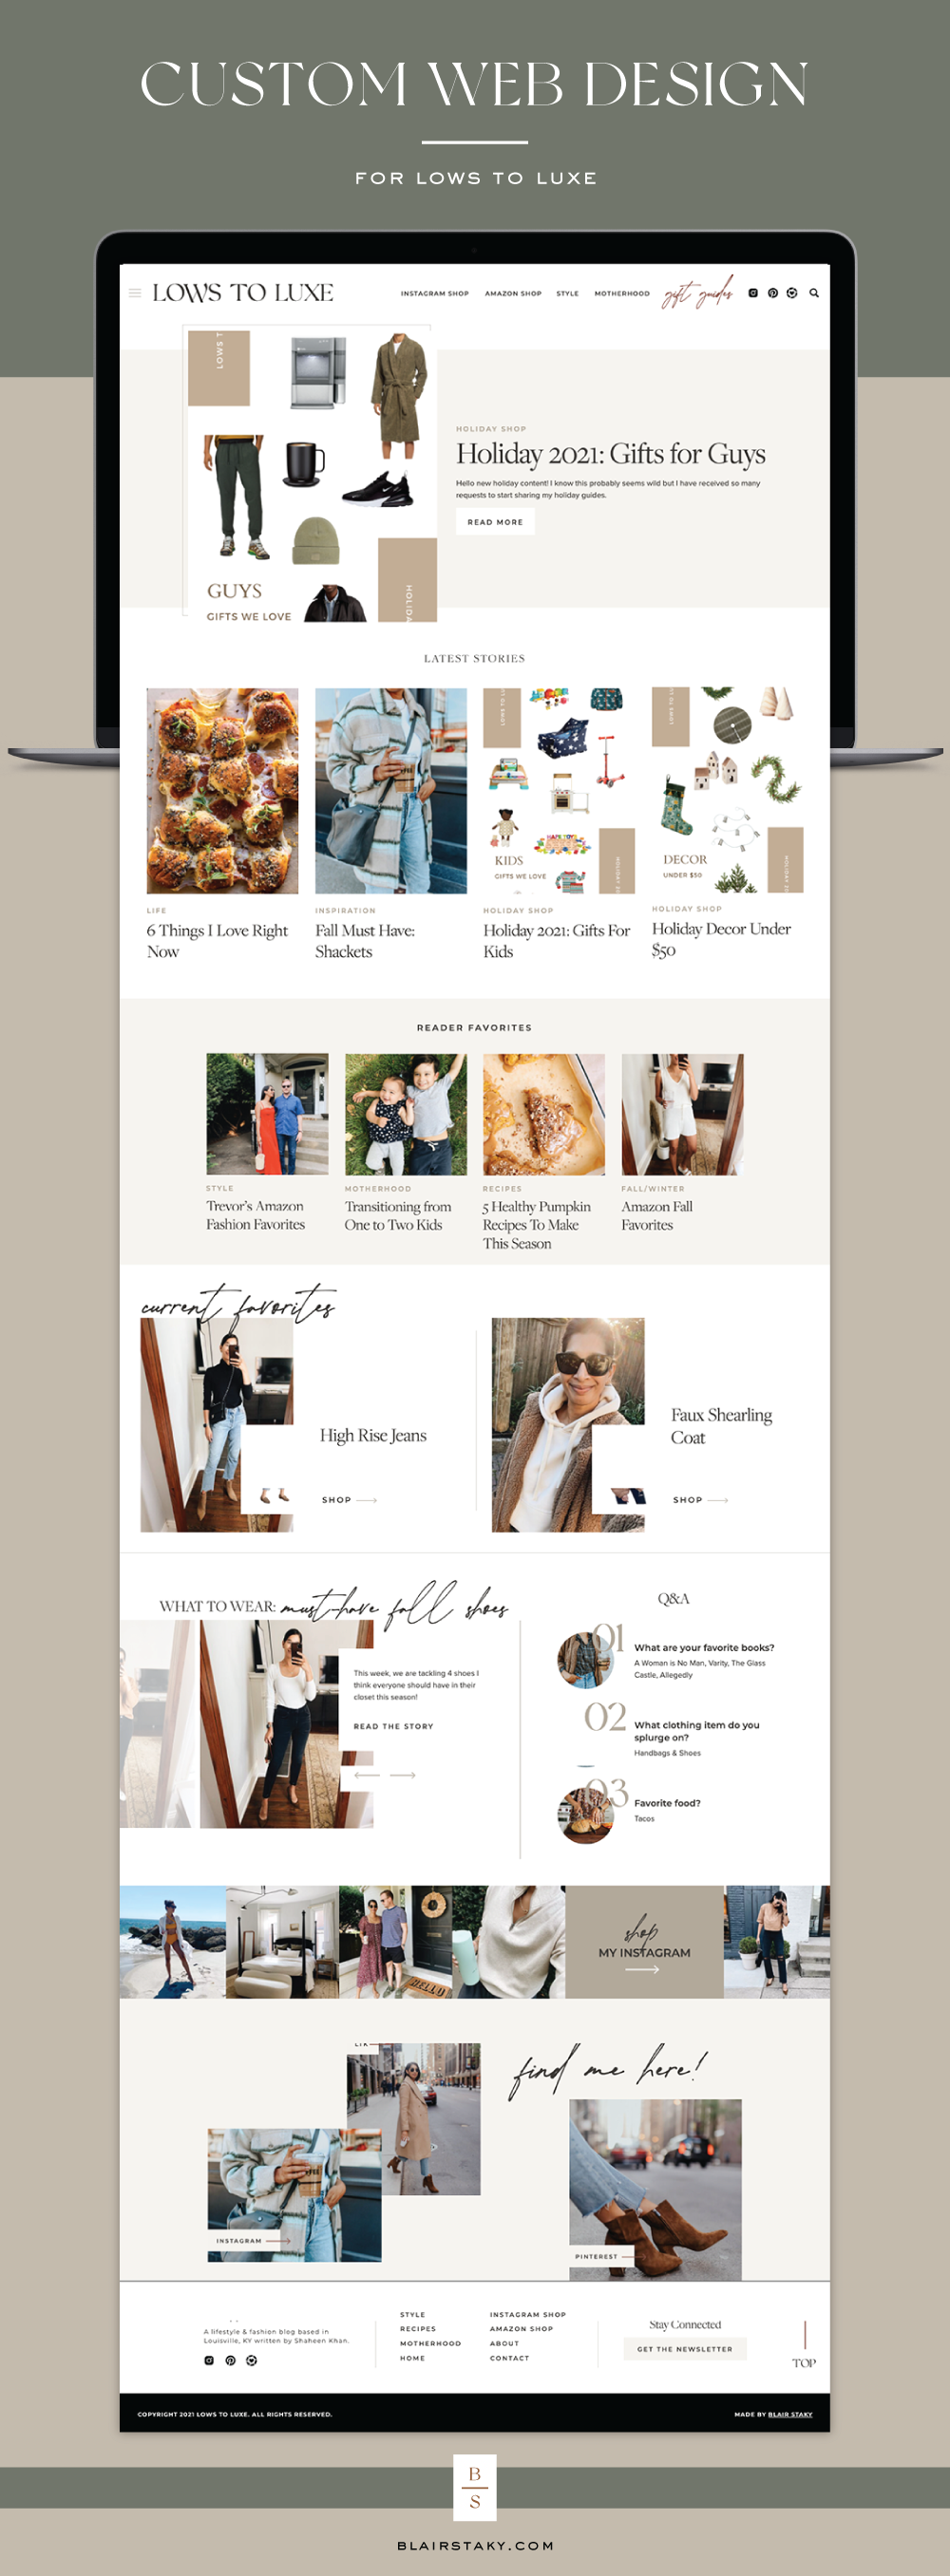 Custom web and blog design for fashion and lifestyle blog by Blair Staky design, built on Showit and WordPress for Design for Lows to Luxe